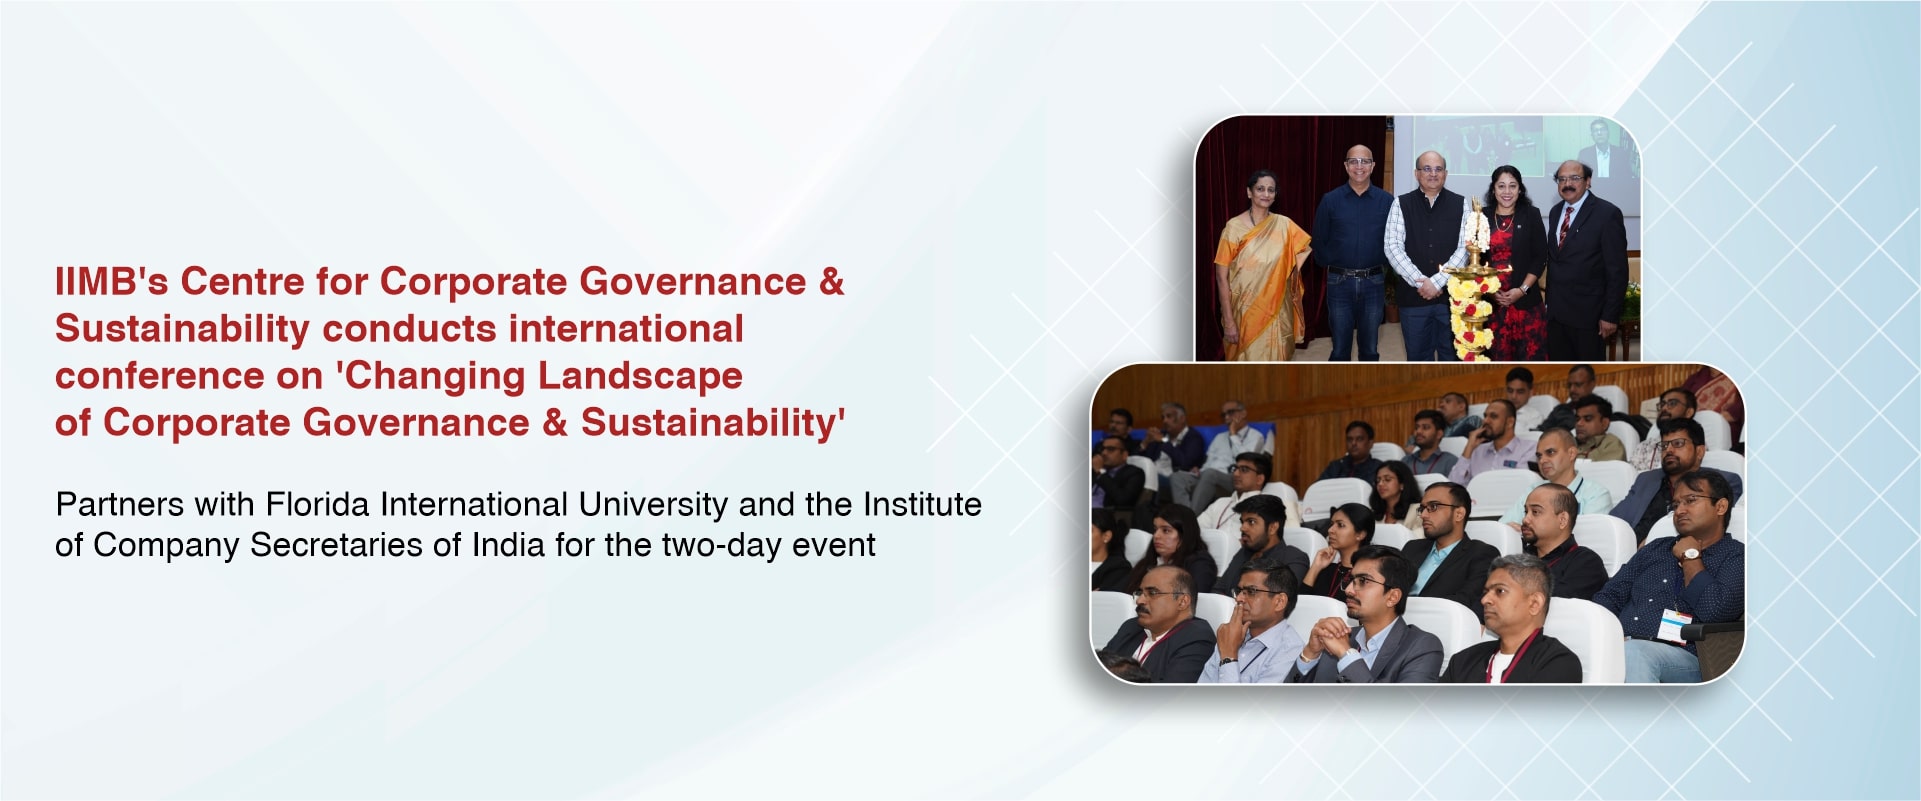 IIMB’s Centre for Corporate Governance & Sustainability conducts international conference on ‘Changing Landscape of Corporate Governance & Sustainability’